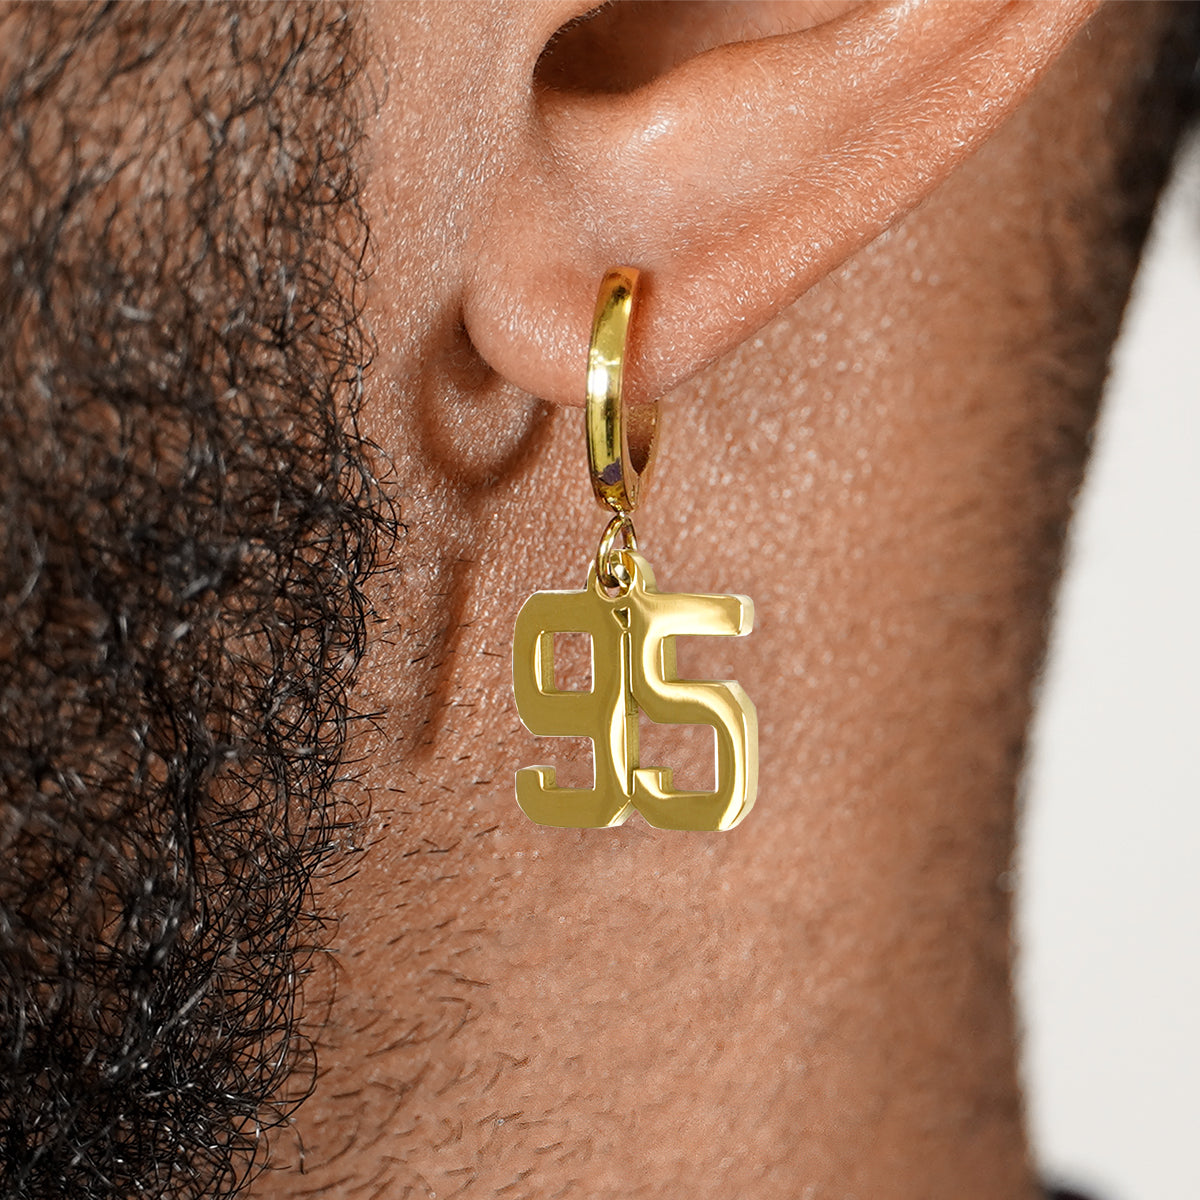 95 Number Earring - Gold Plated Stainless Steel